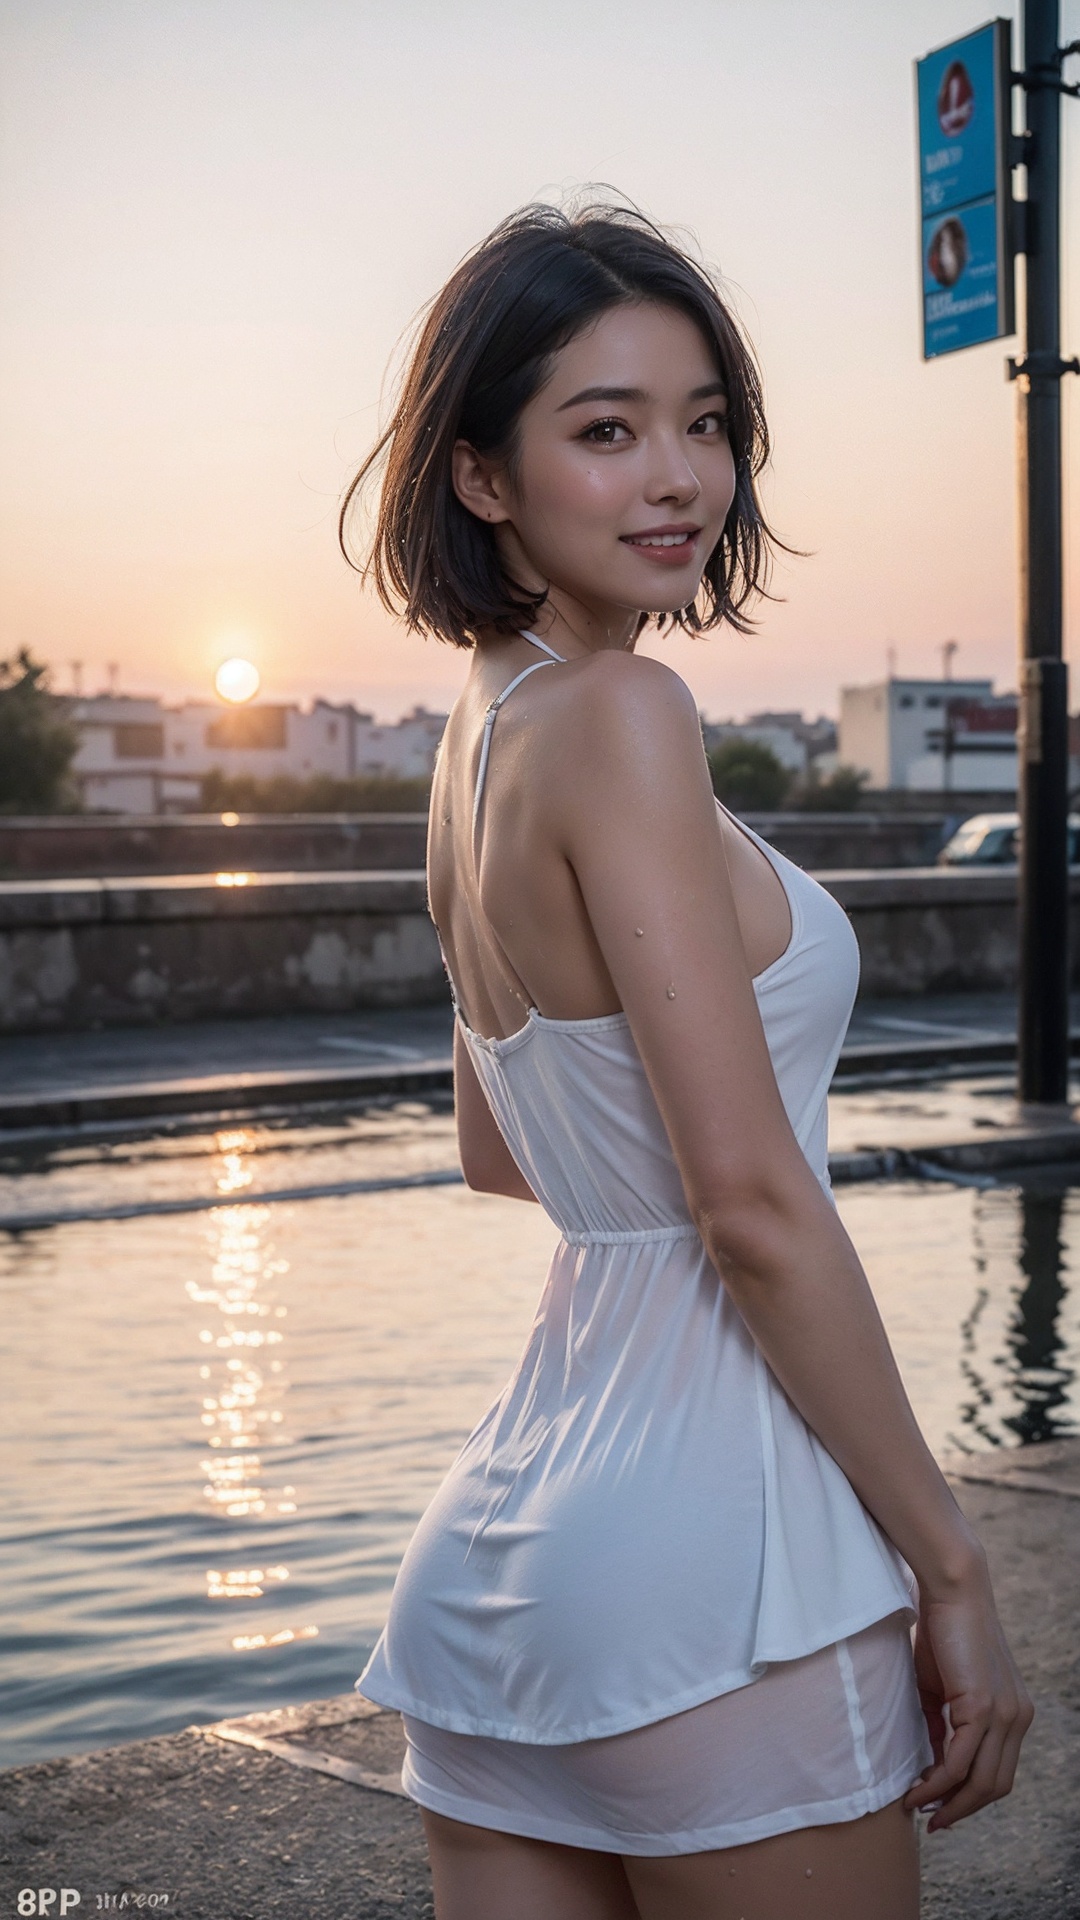 ((Top Quality, 8K, Masterpiece: 1.3)), Focus: 1.2, Perfect Body Beauty: 1.4, Ass: 1.2, ((Layered Haircut, Breasts: 1.2)), (Wet Clothes: 1.1), (Sunset, Street: 1.3), Bando Dress: 1.1, Highly Detailed Face and Skin Texture, Narrow Eyes, Double Eyelids, Whitening Skin, Long Hair, (Shut Up: 1.3), Smile